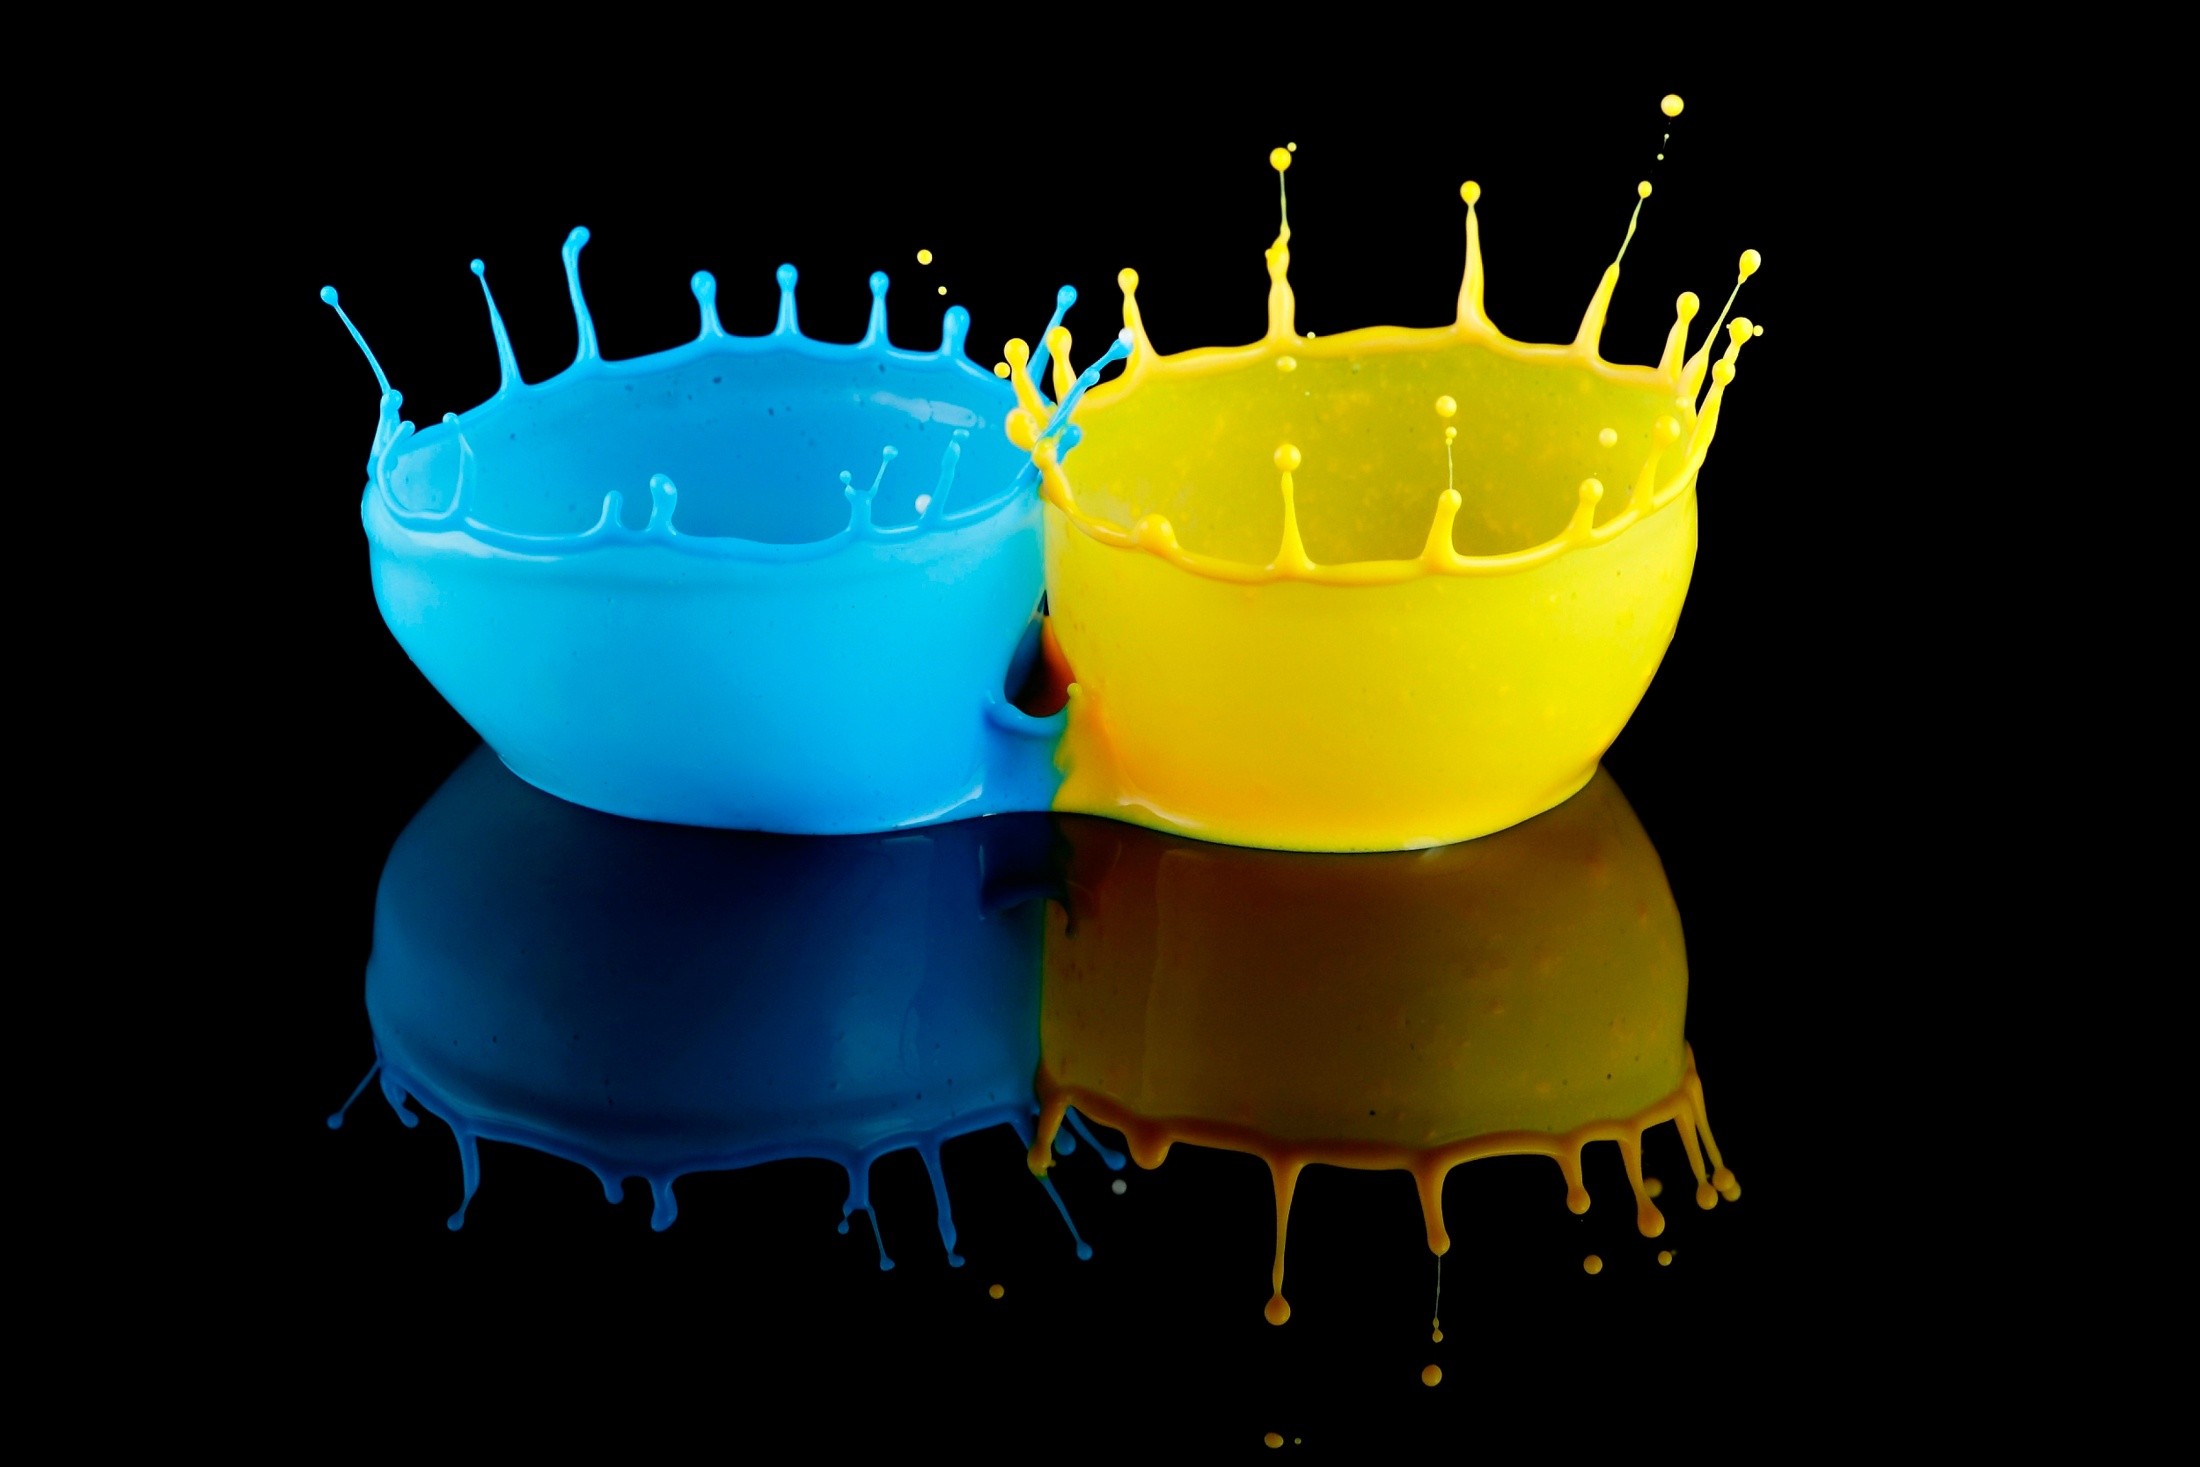 General 2200x1467 water drops colorful reflection dark background blue yellow black background